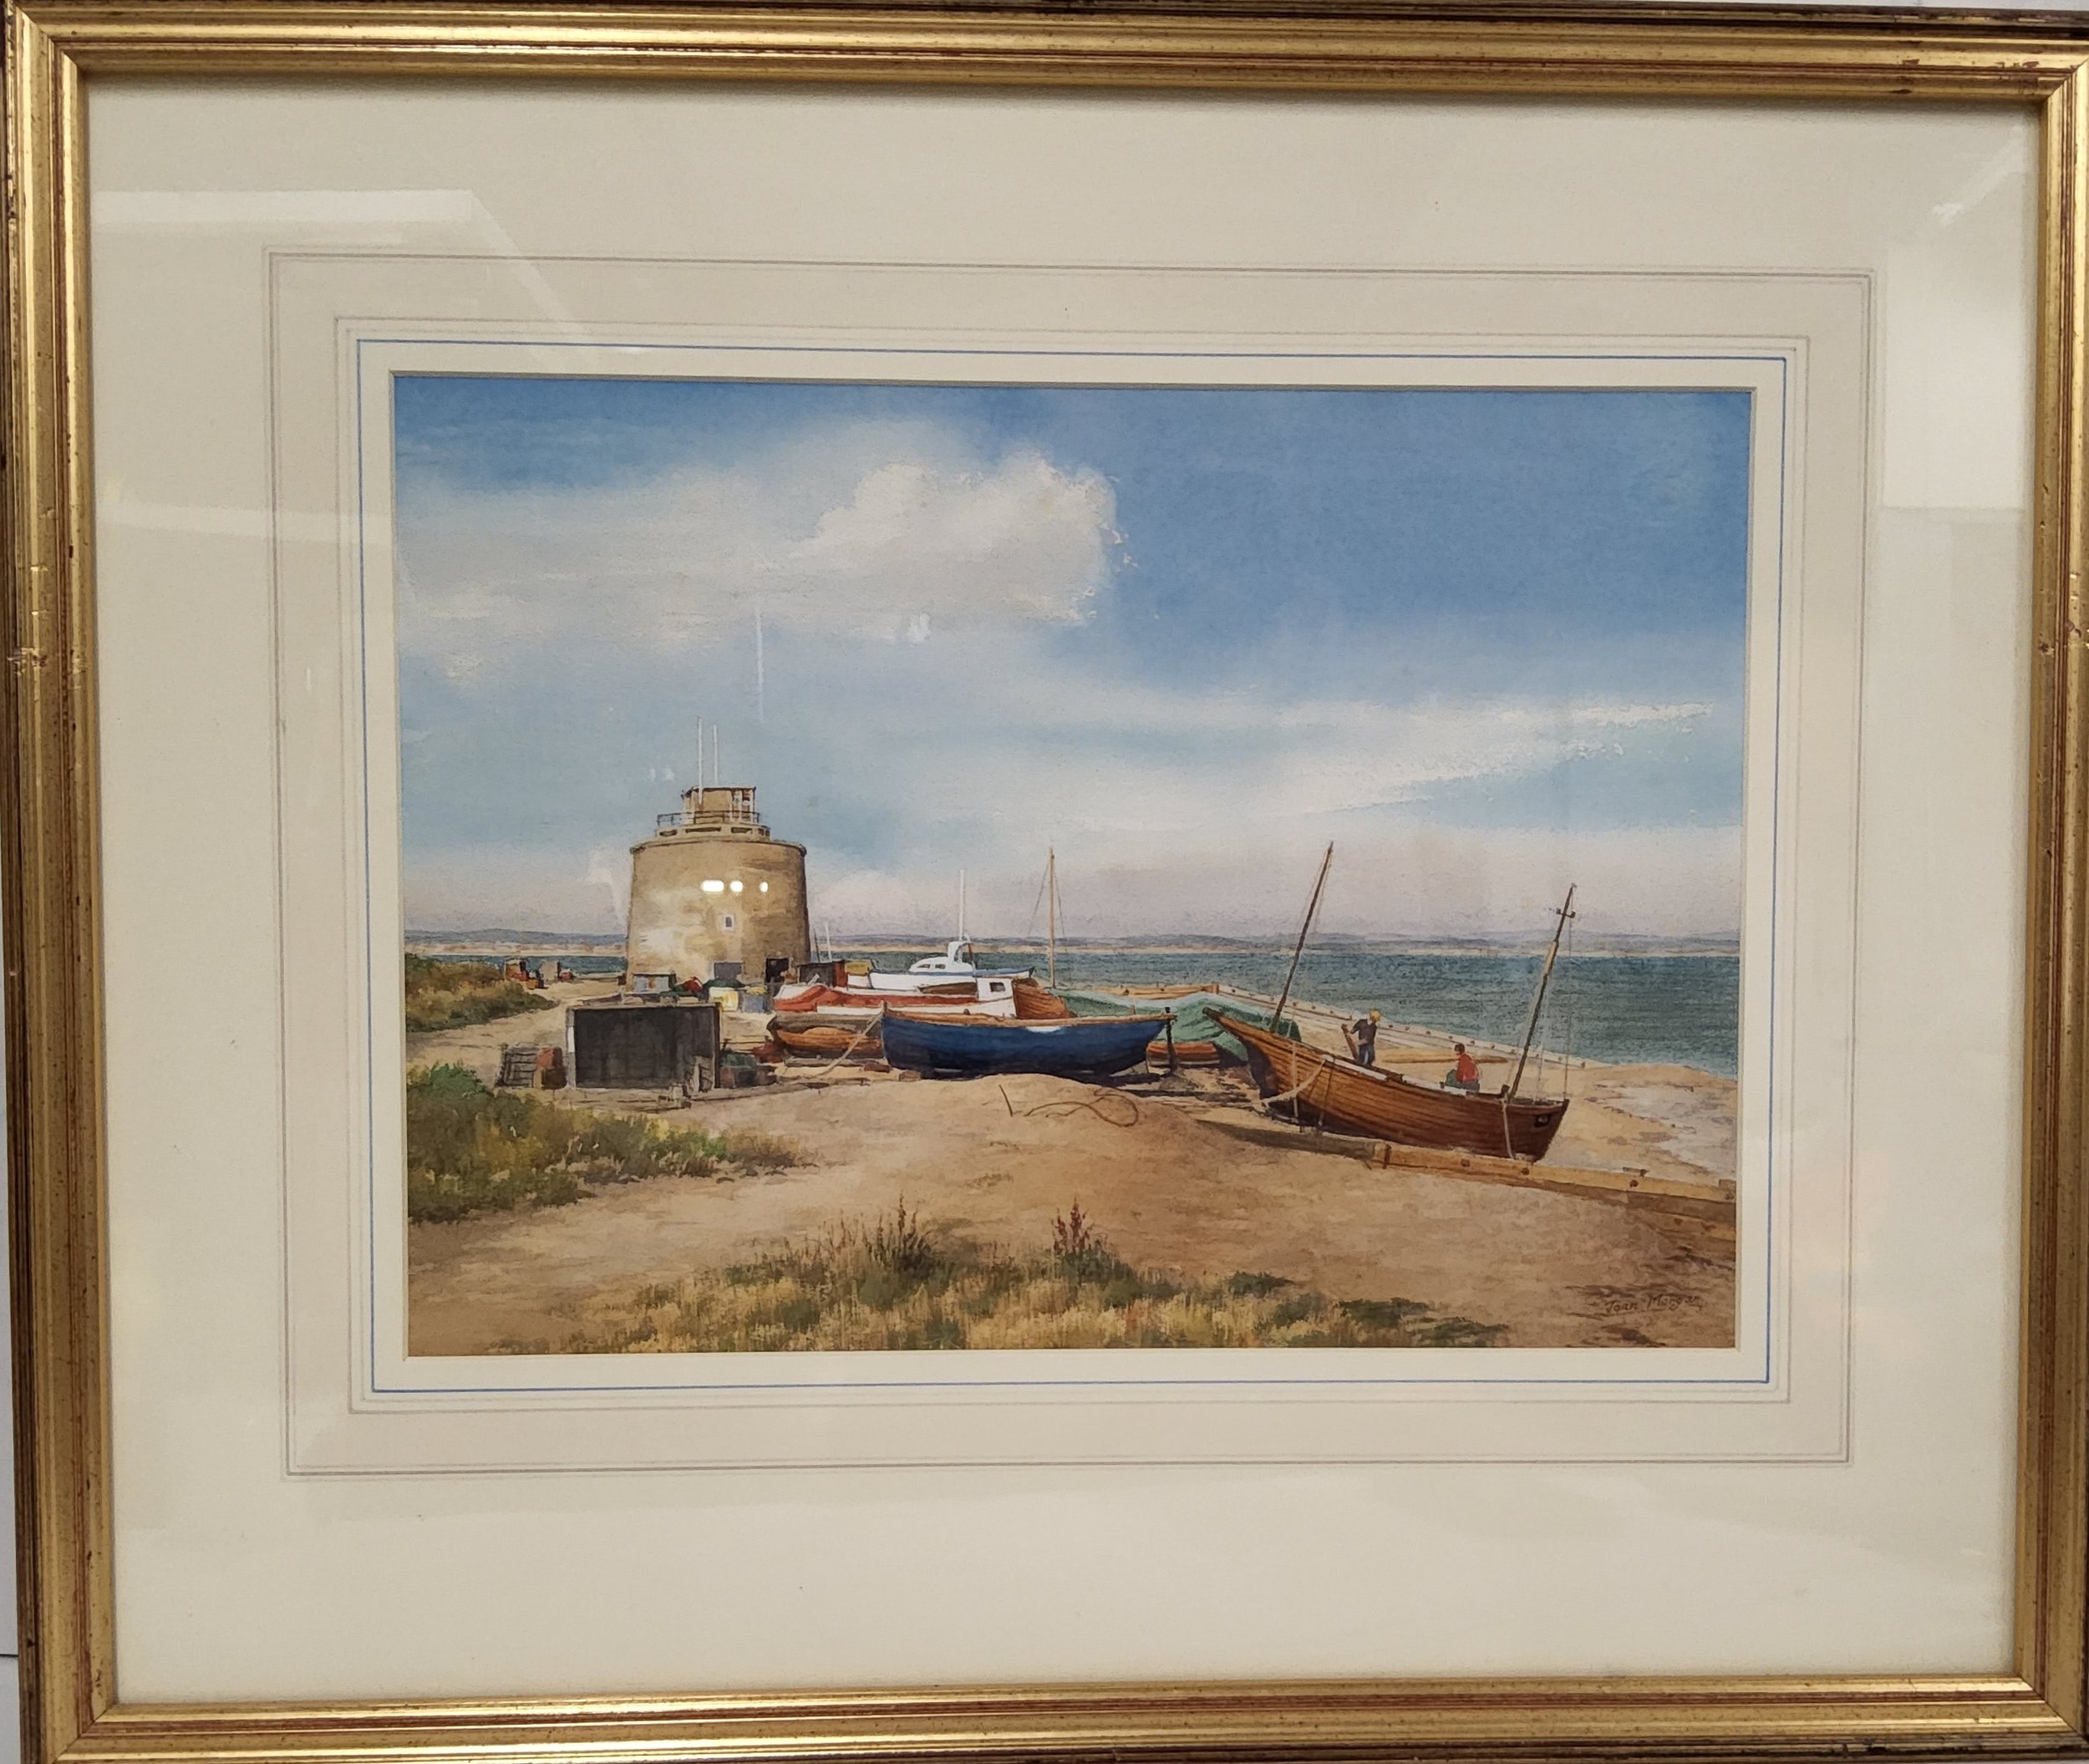 Joan Morgan, Martello Tower and Fishing Boats, signed, watercolour, 27cm x 36.5cm